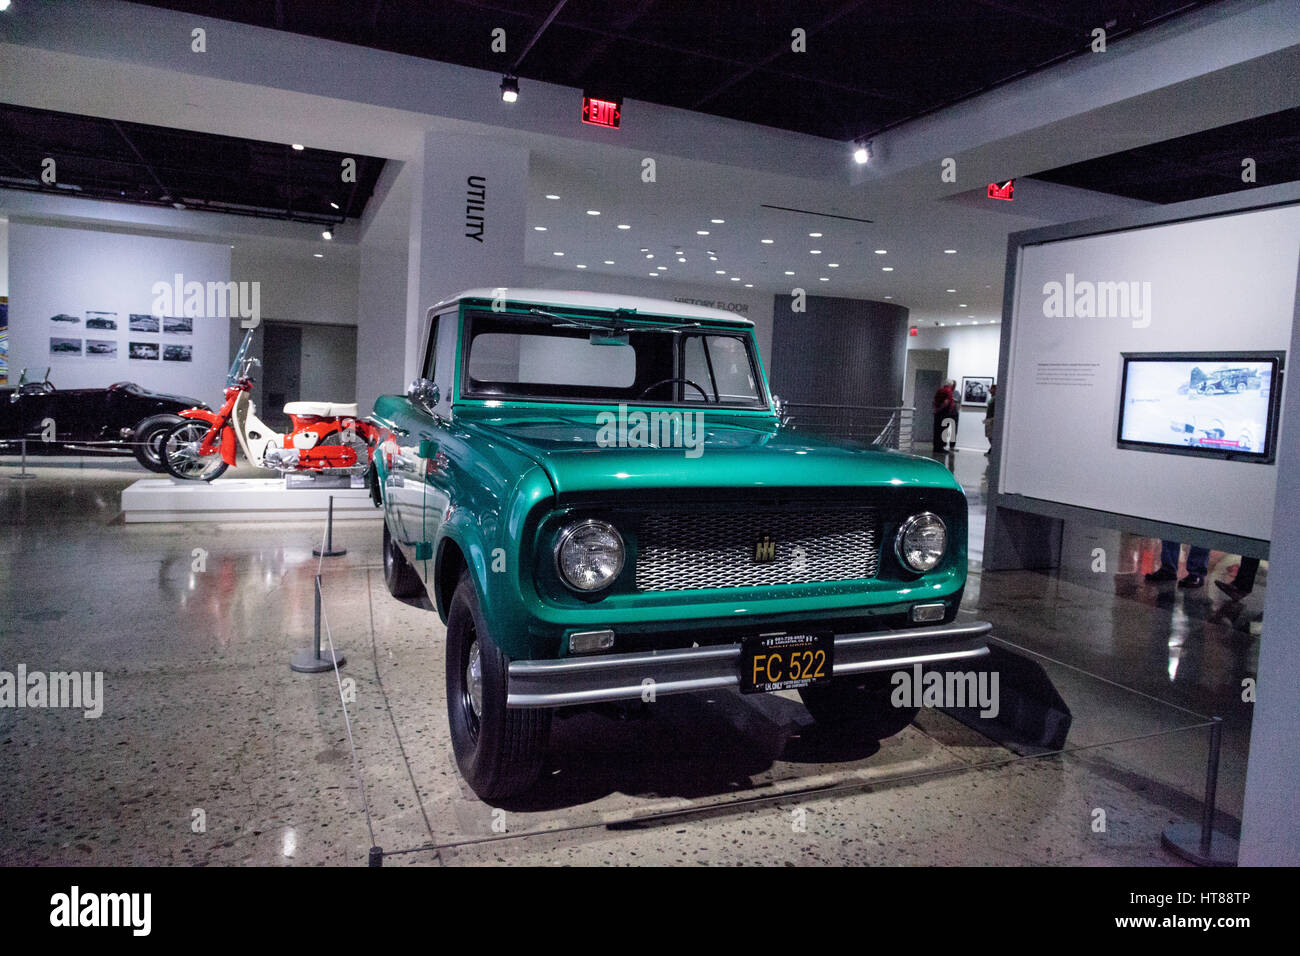 Los Angeles, CA, USA — March 4, 2017: Green 1961 International Scout 80 truck by Harvester at the Petersen Automotive Museum in Los Angeles, Californi Stock Photo